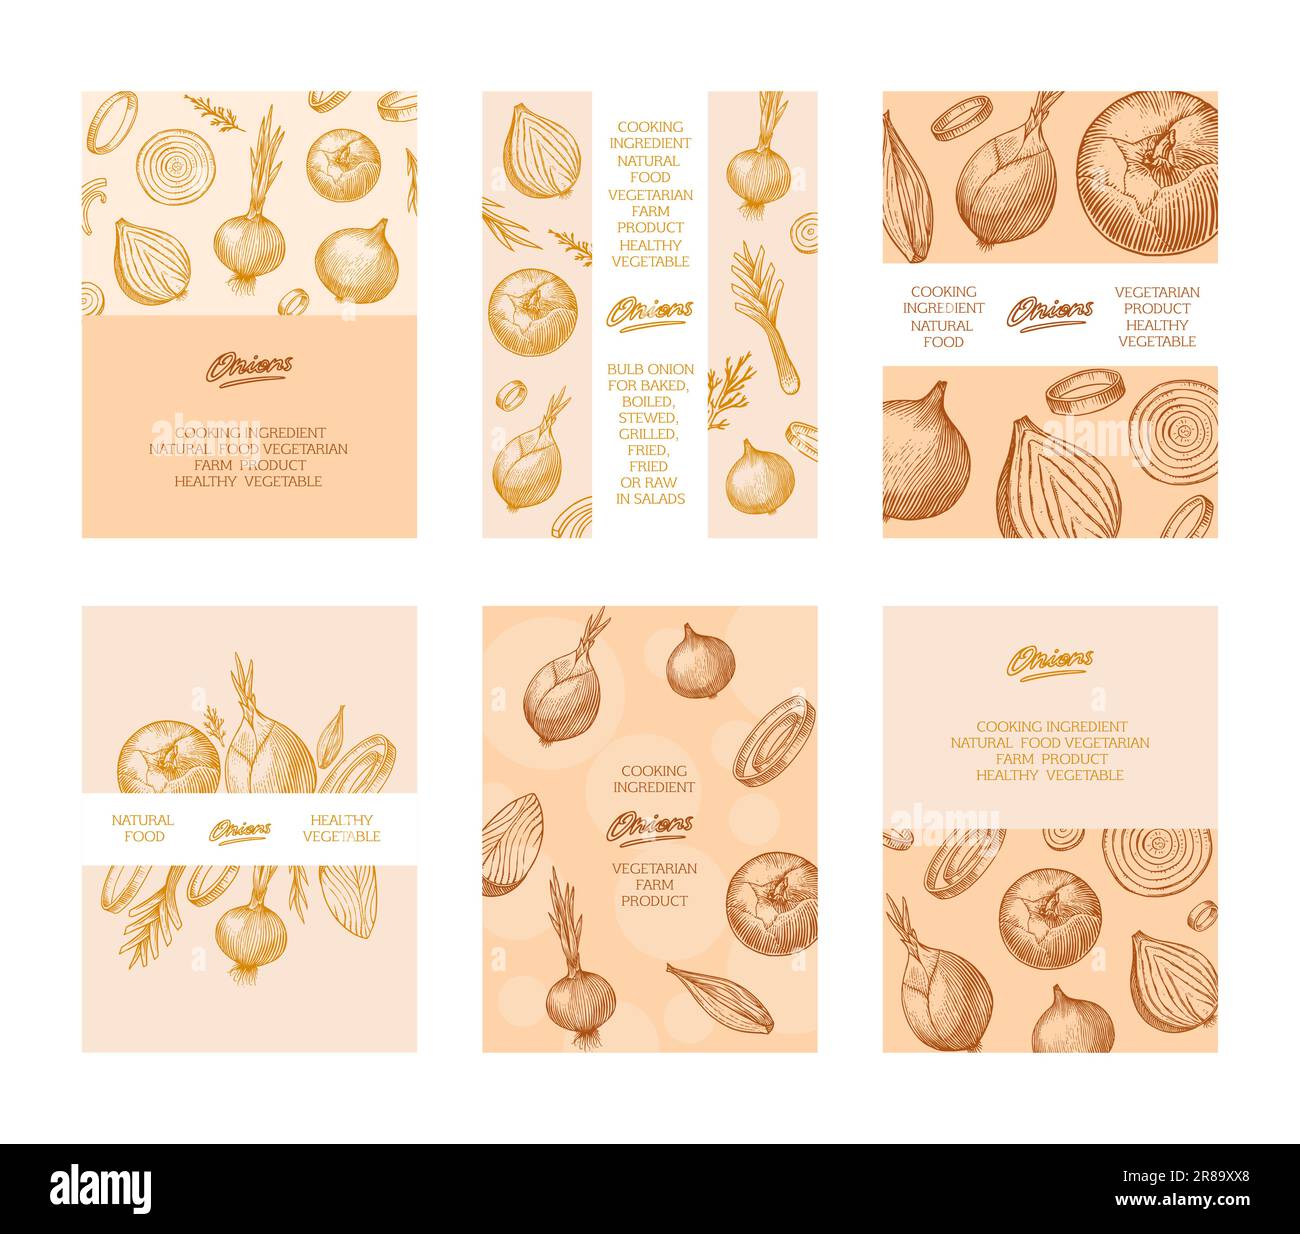 Onion bulb poster or banner, Half cutout slice and rings. Hand drawn with ink in vintage style. Linear graphic outline design. Detailed vegetarian Stock Vector